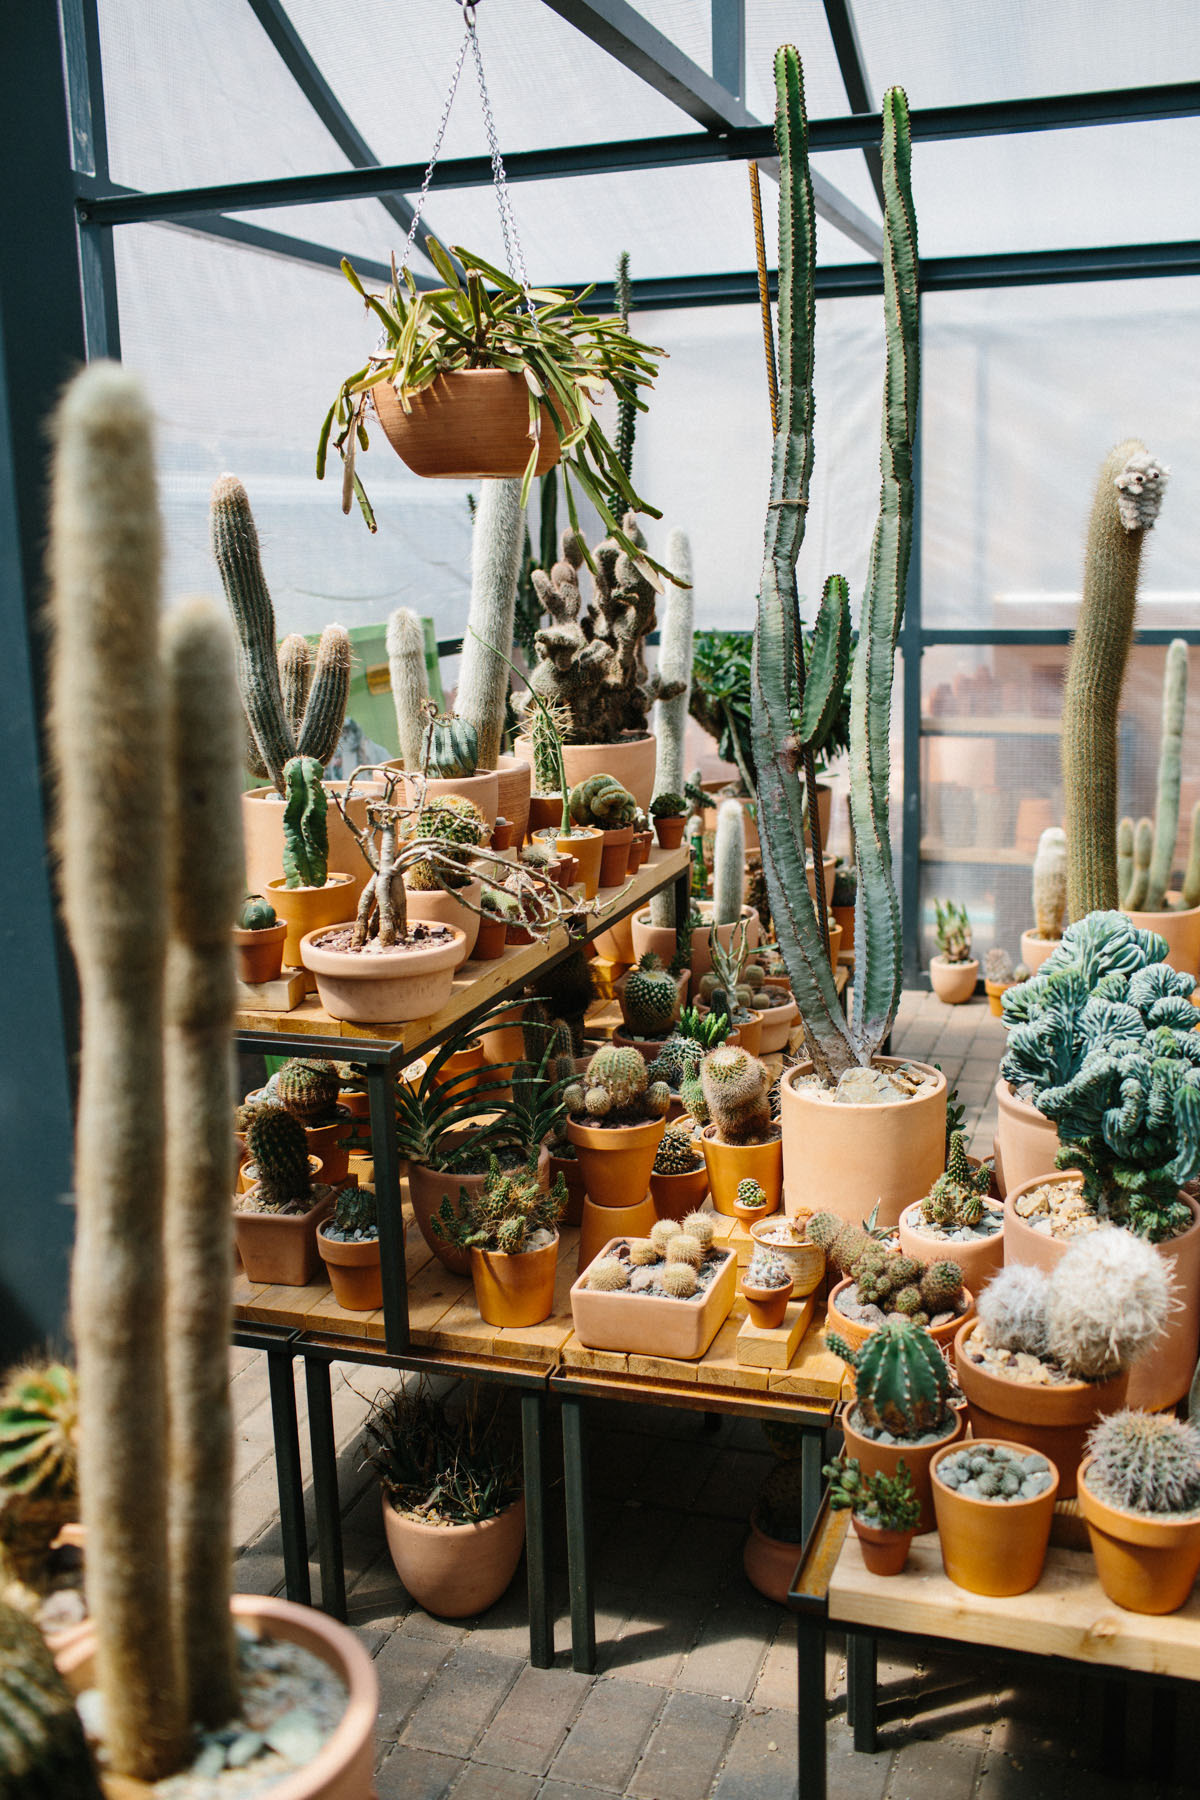 Cactus Pop-Up Shop in Chinatown